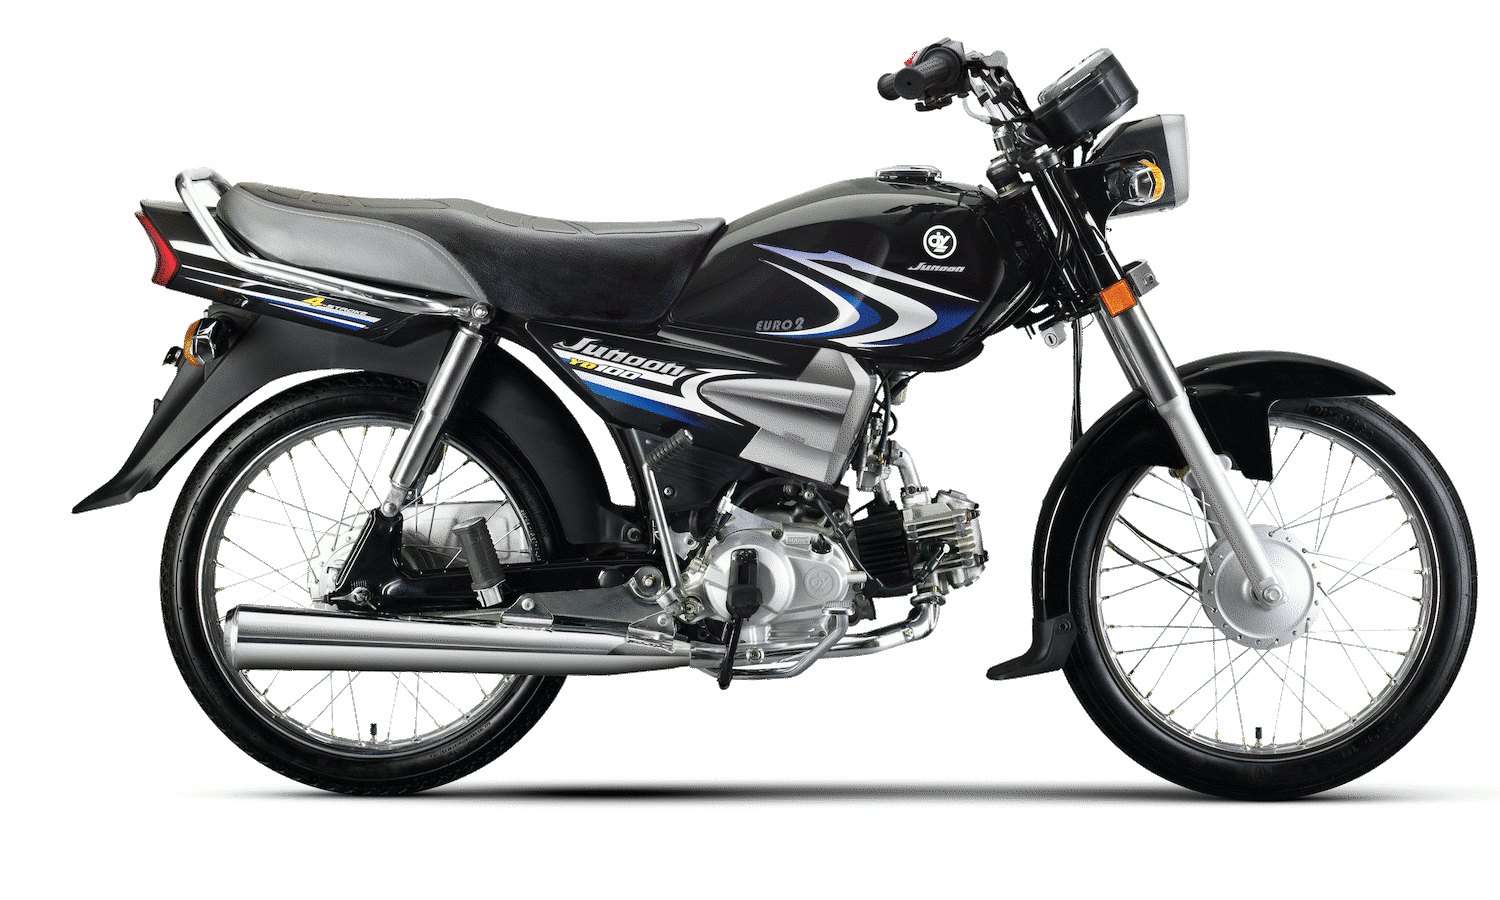 Yamaha Junoon Price In Pakistan 2020 Is Mentioned Here